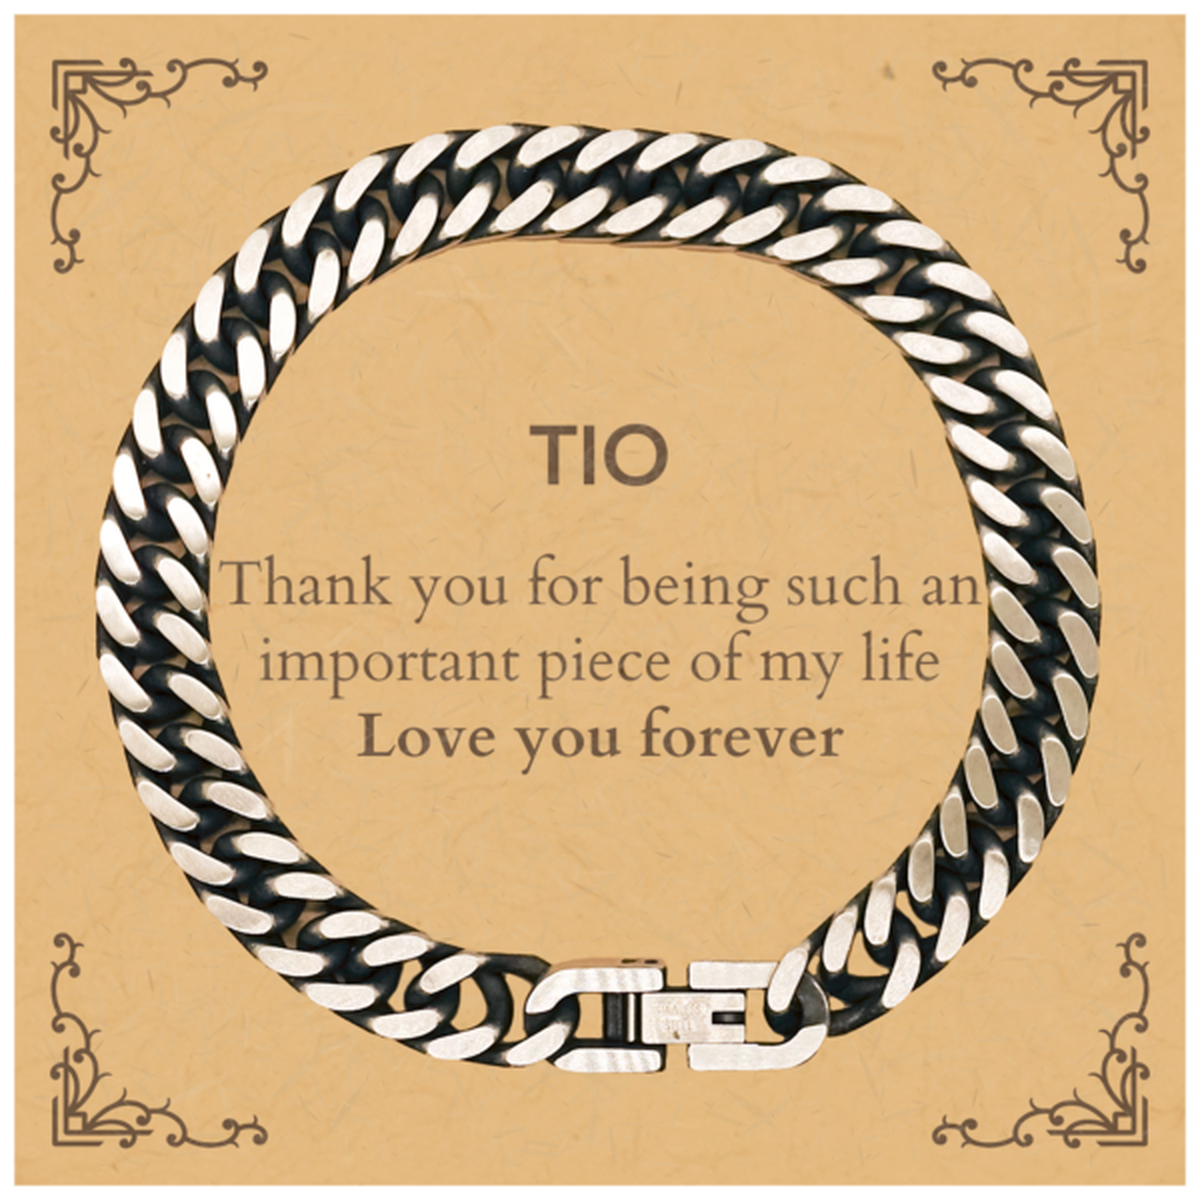 Appropriate Tio Cuban Link Chain Bracelet Epic Birthday Gifts for Tio Thank you for being such an important piece of my life Tio Christmas Mothers Fathers Day